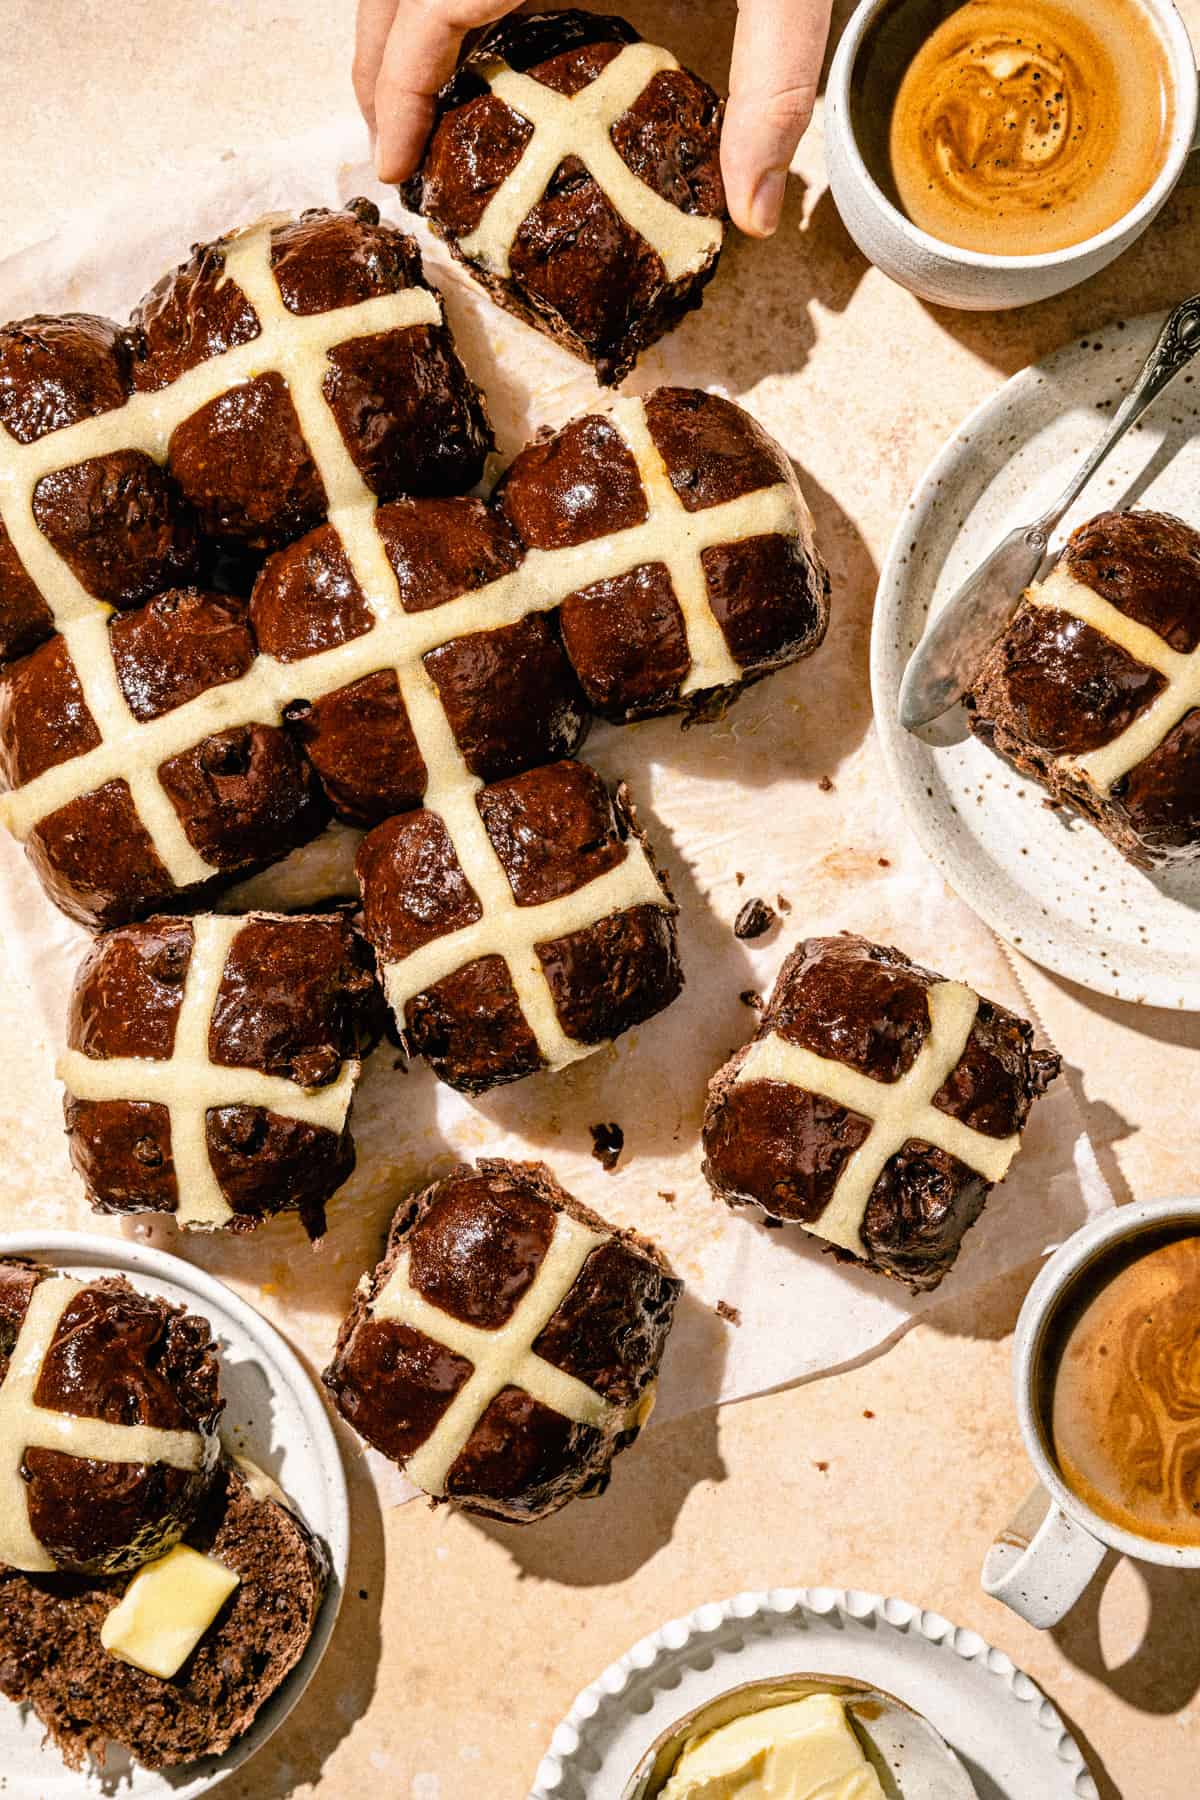 An array of hot cross buns on parchment paper with a coffee and plate to the side.